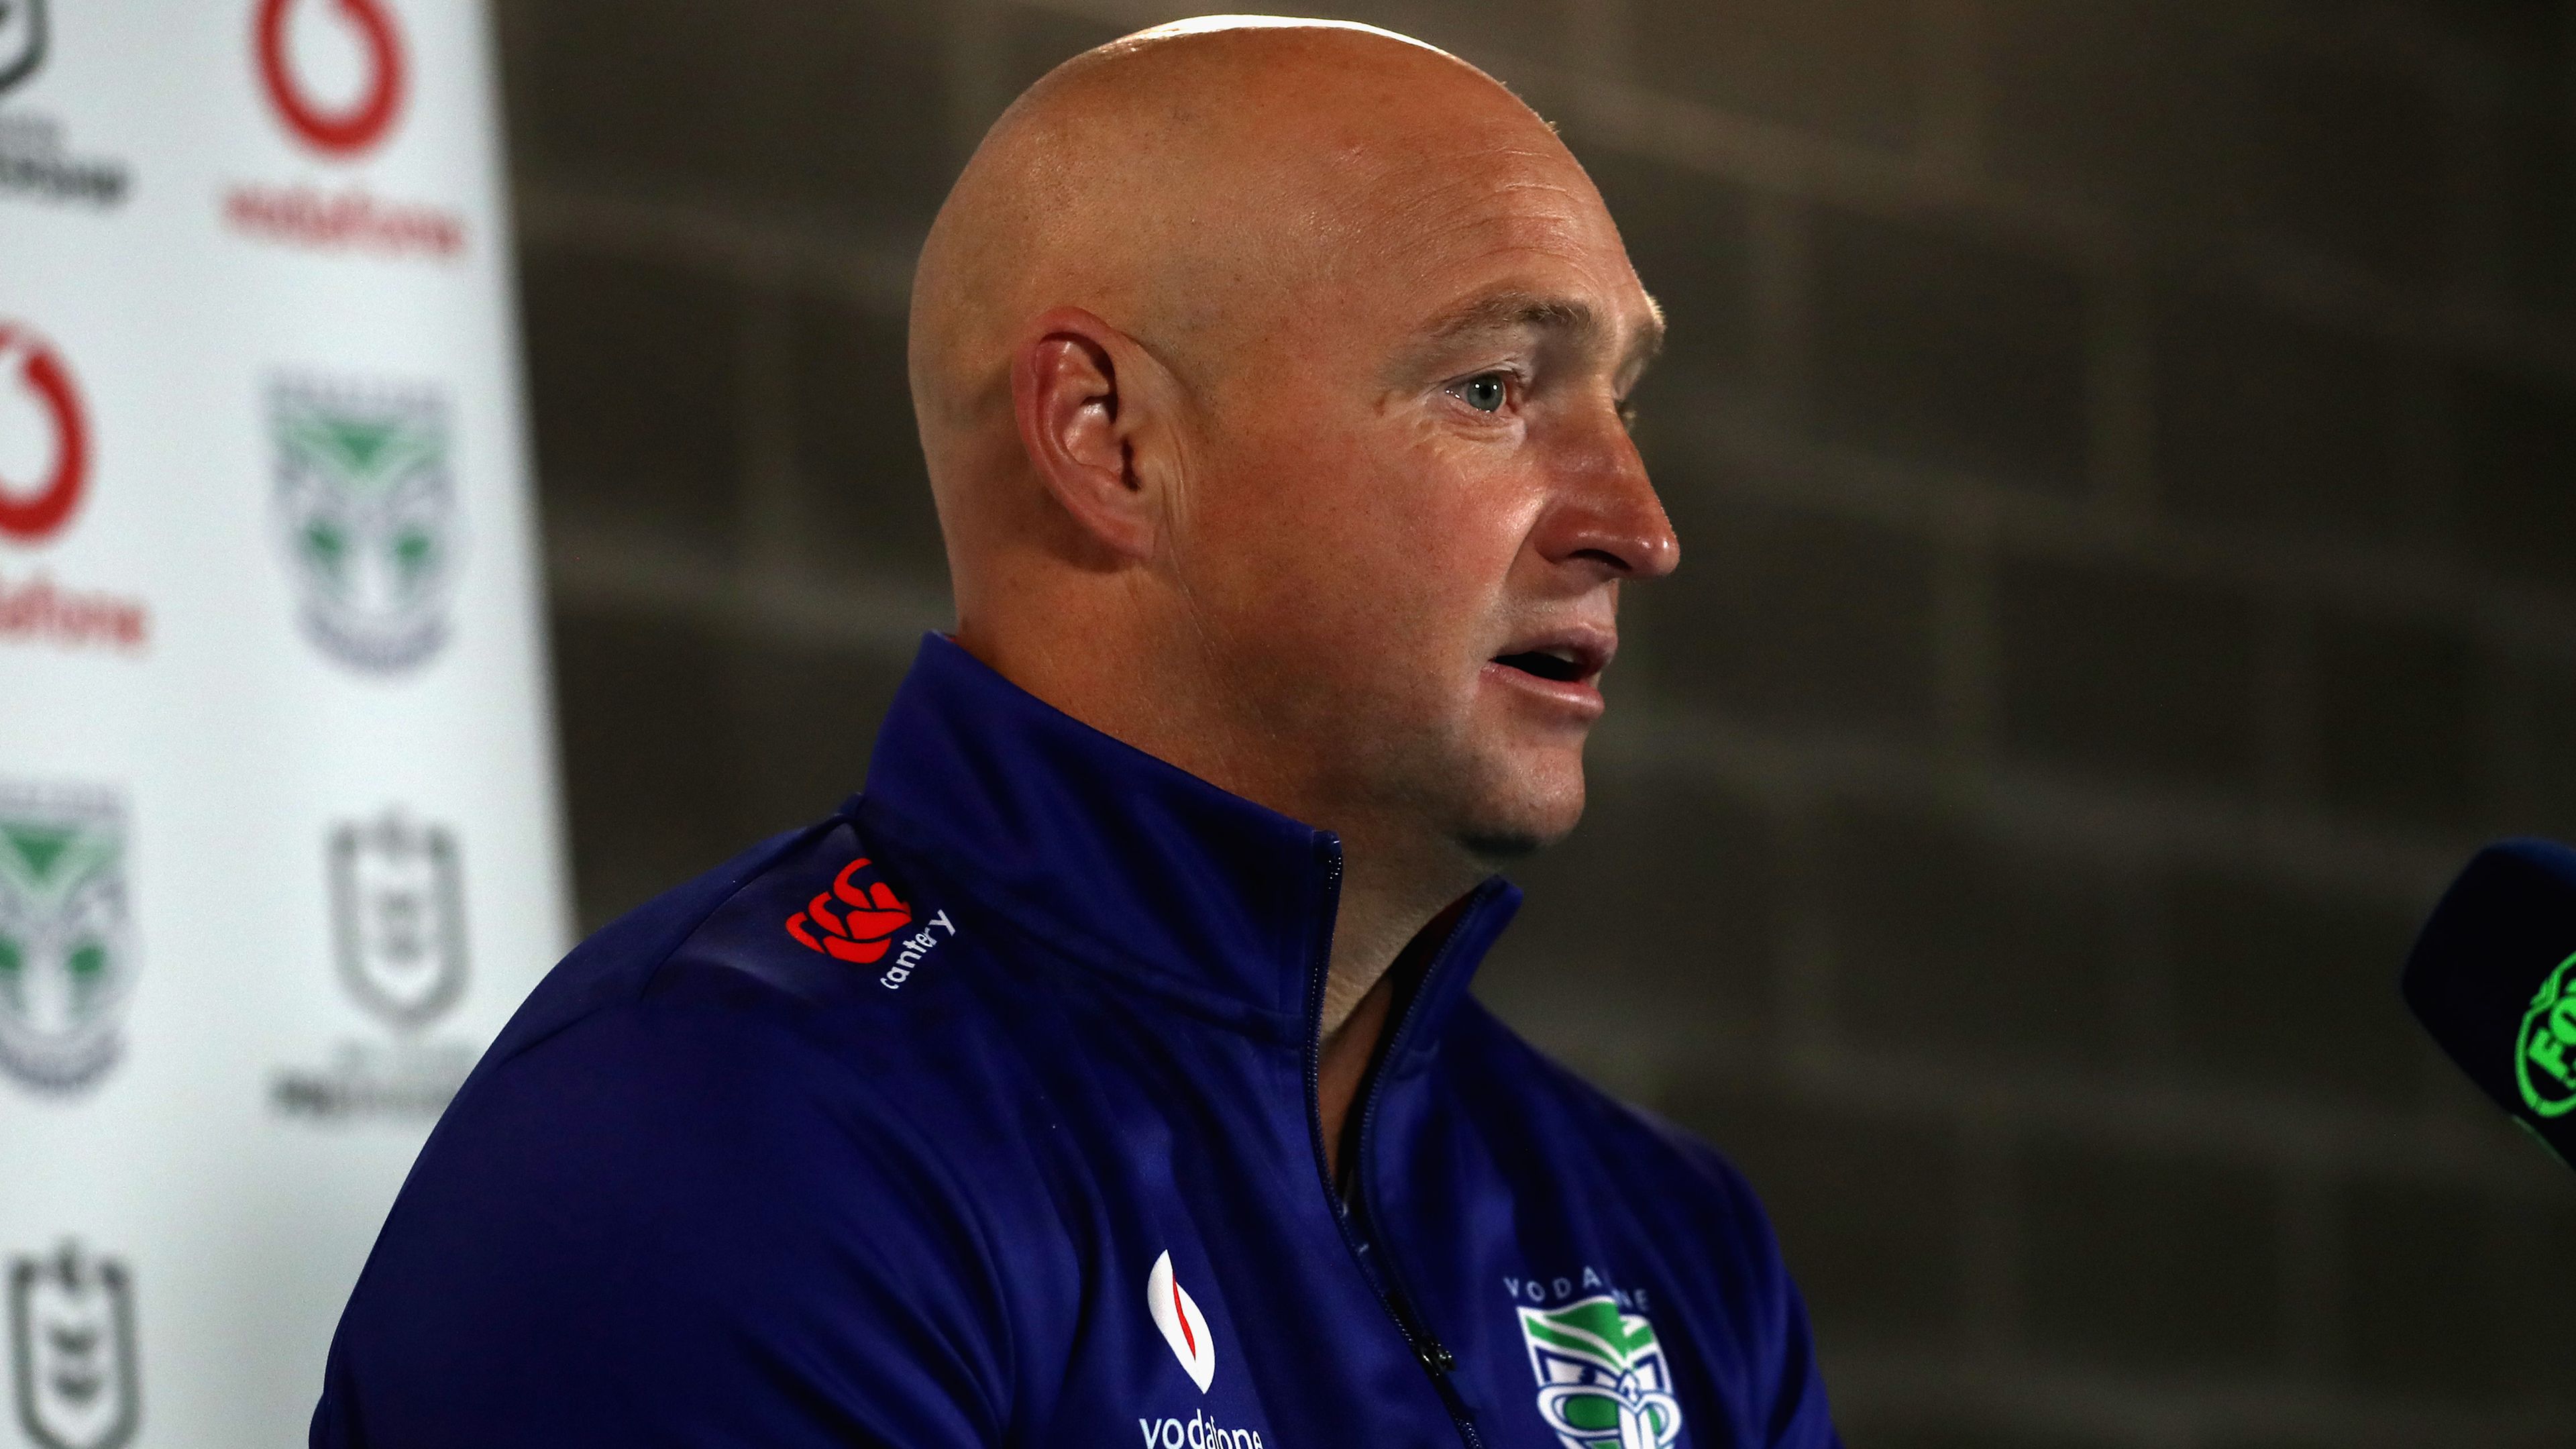 Nathan Brown announces end to head coaching career after quitting Warriors post